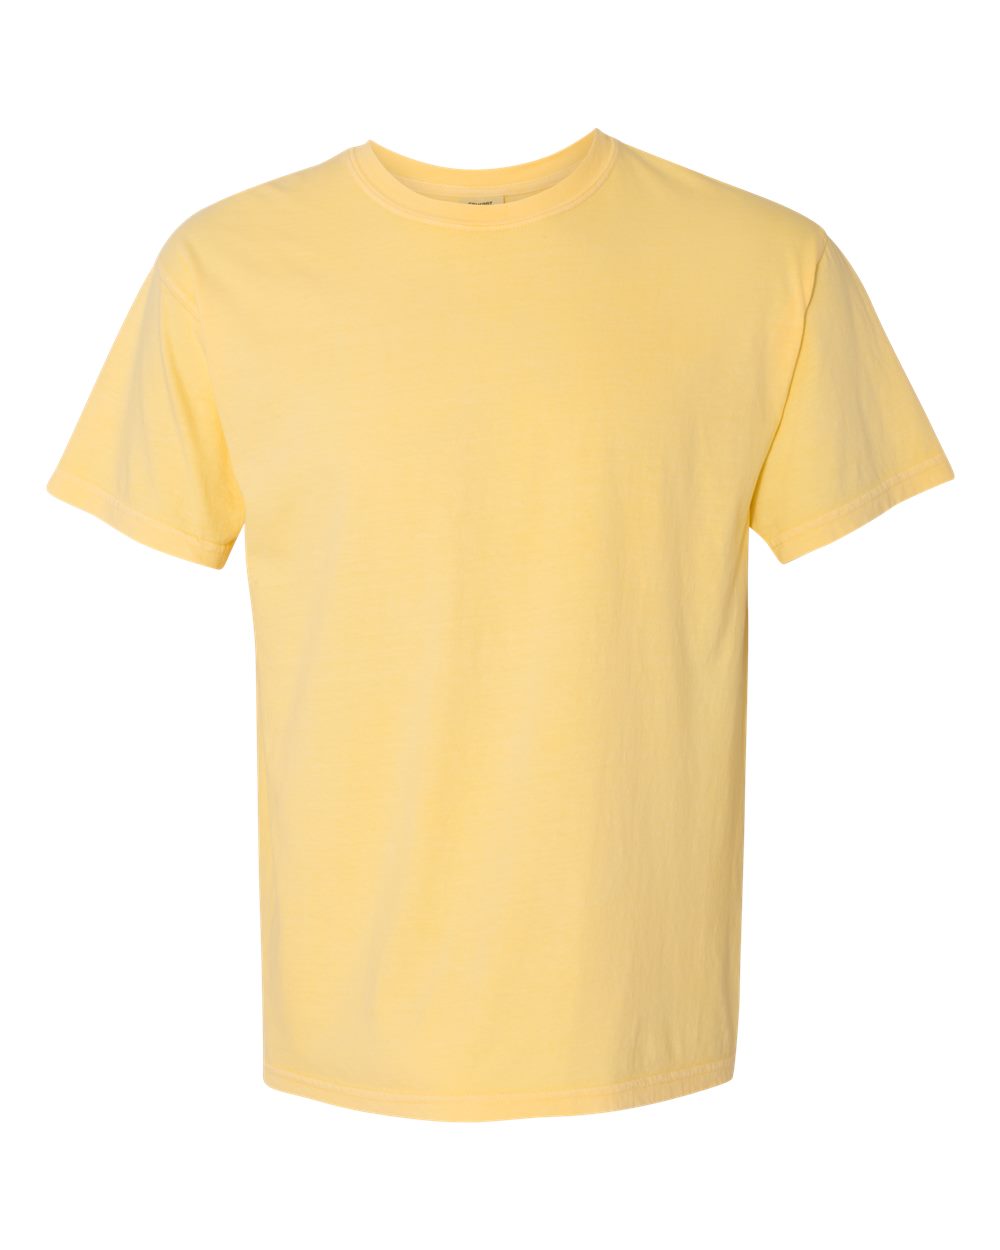 Comfort Colors Garment-Dyed Tee (1717) in Butter